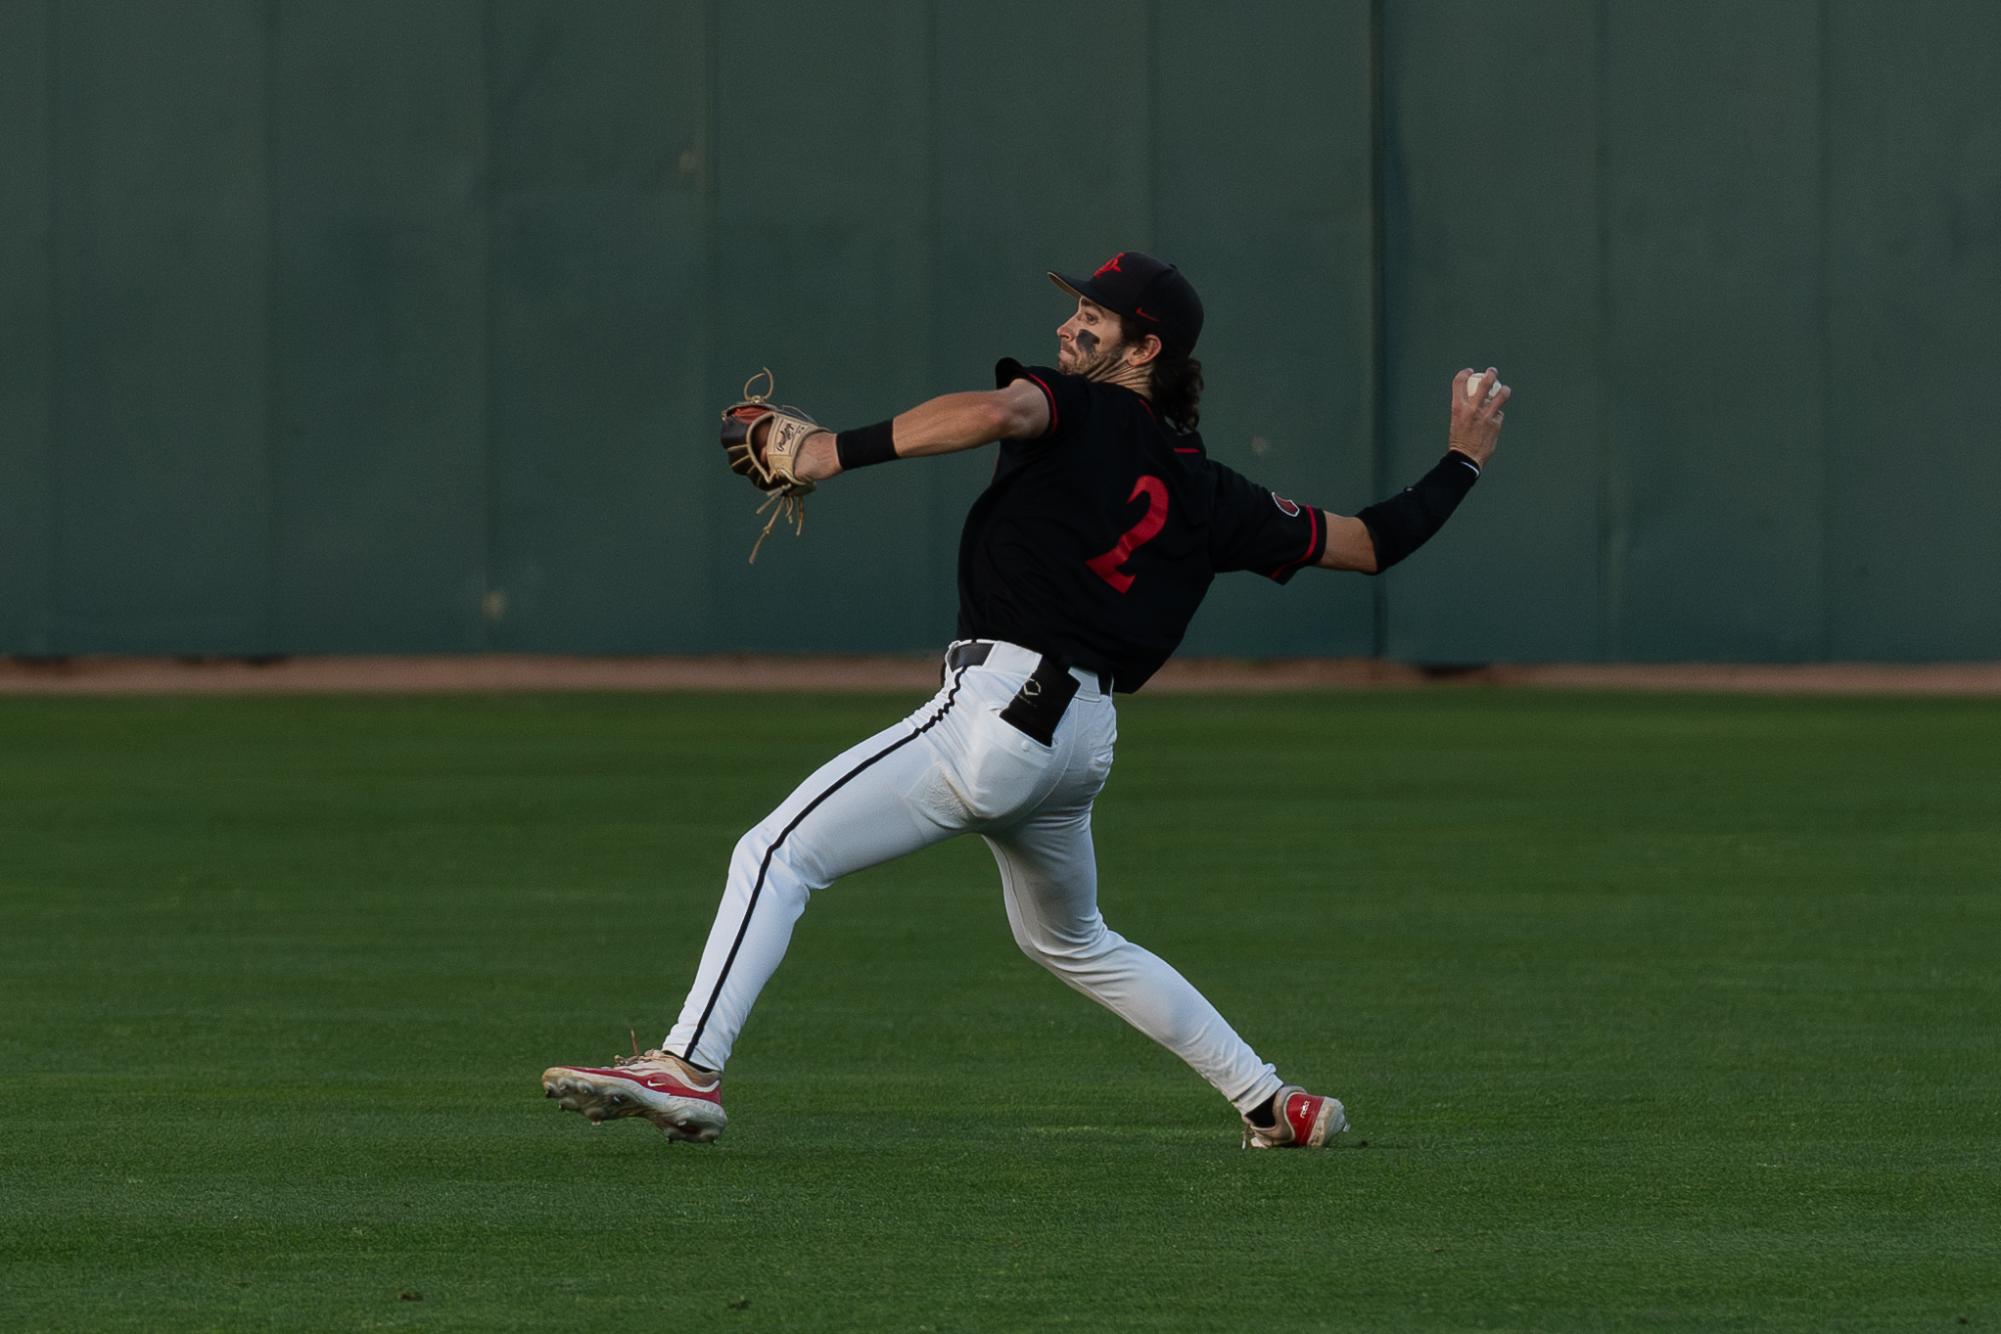 Baseball falls to MWC opponent New Mexico, 8-4 – The Daily Aztec